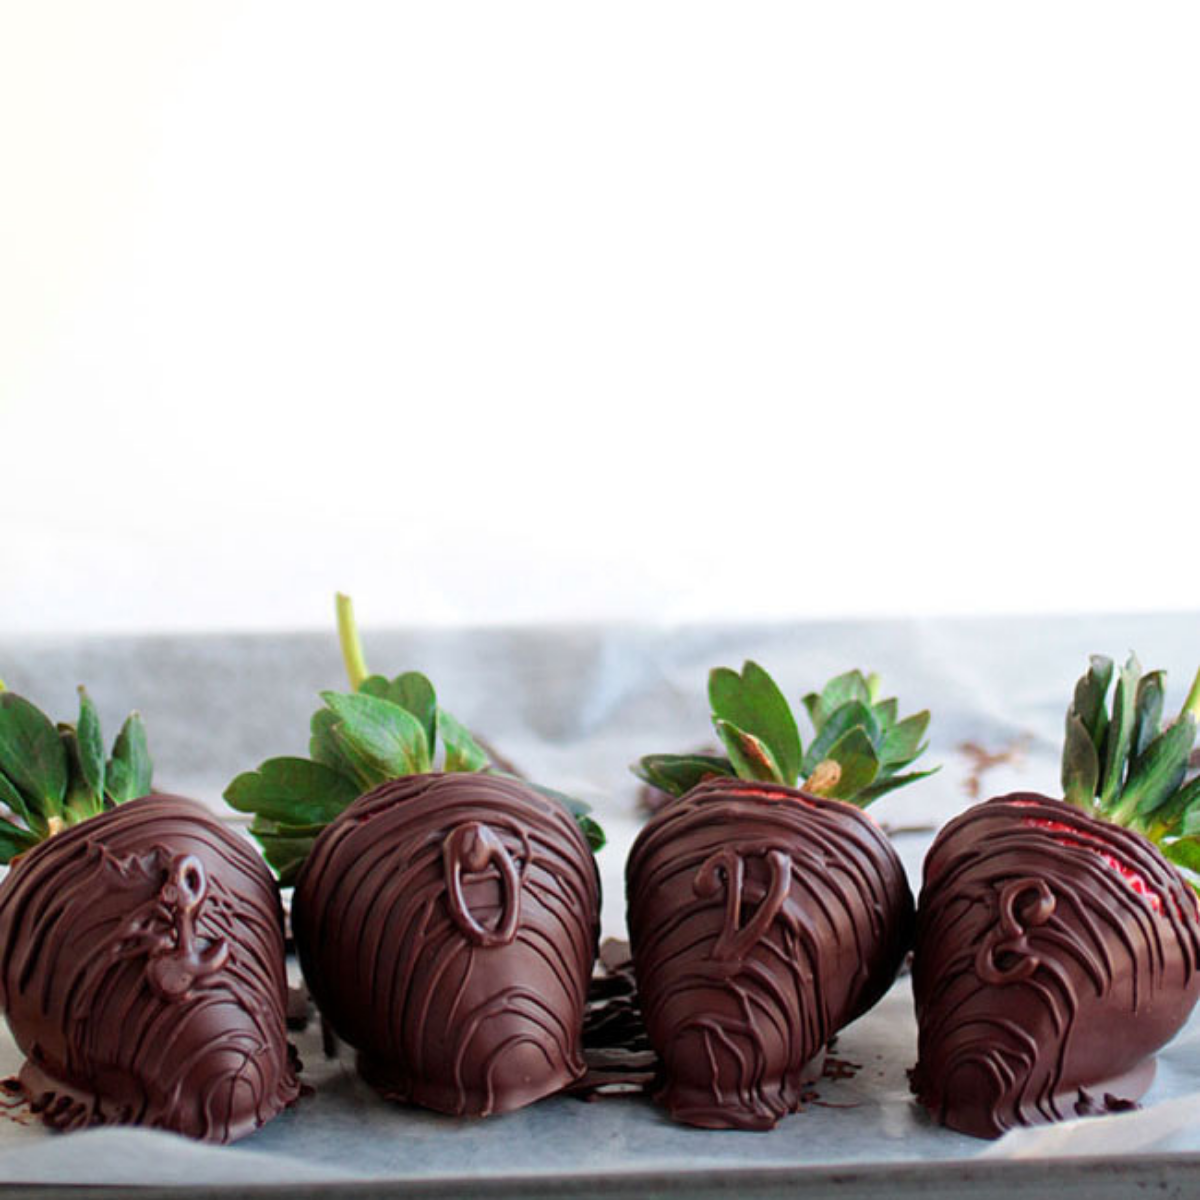 Four chocolate strawberries with chocolate decorations in front of a white background.